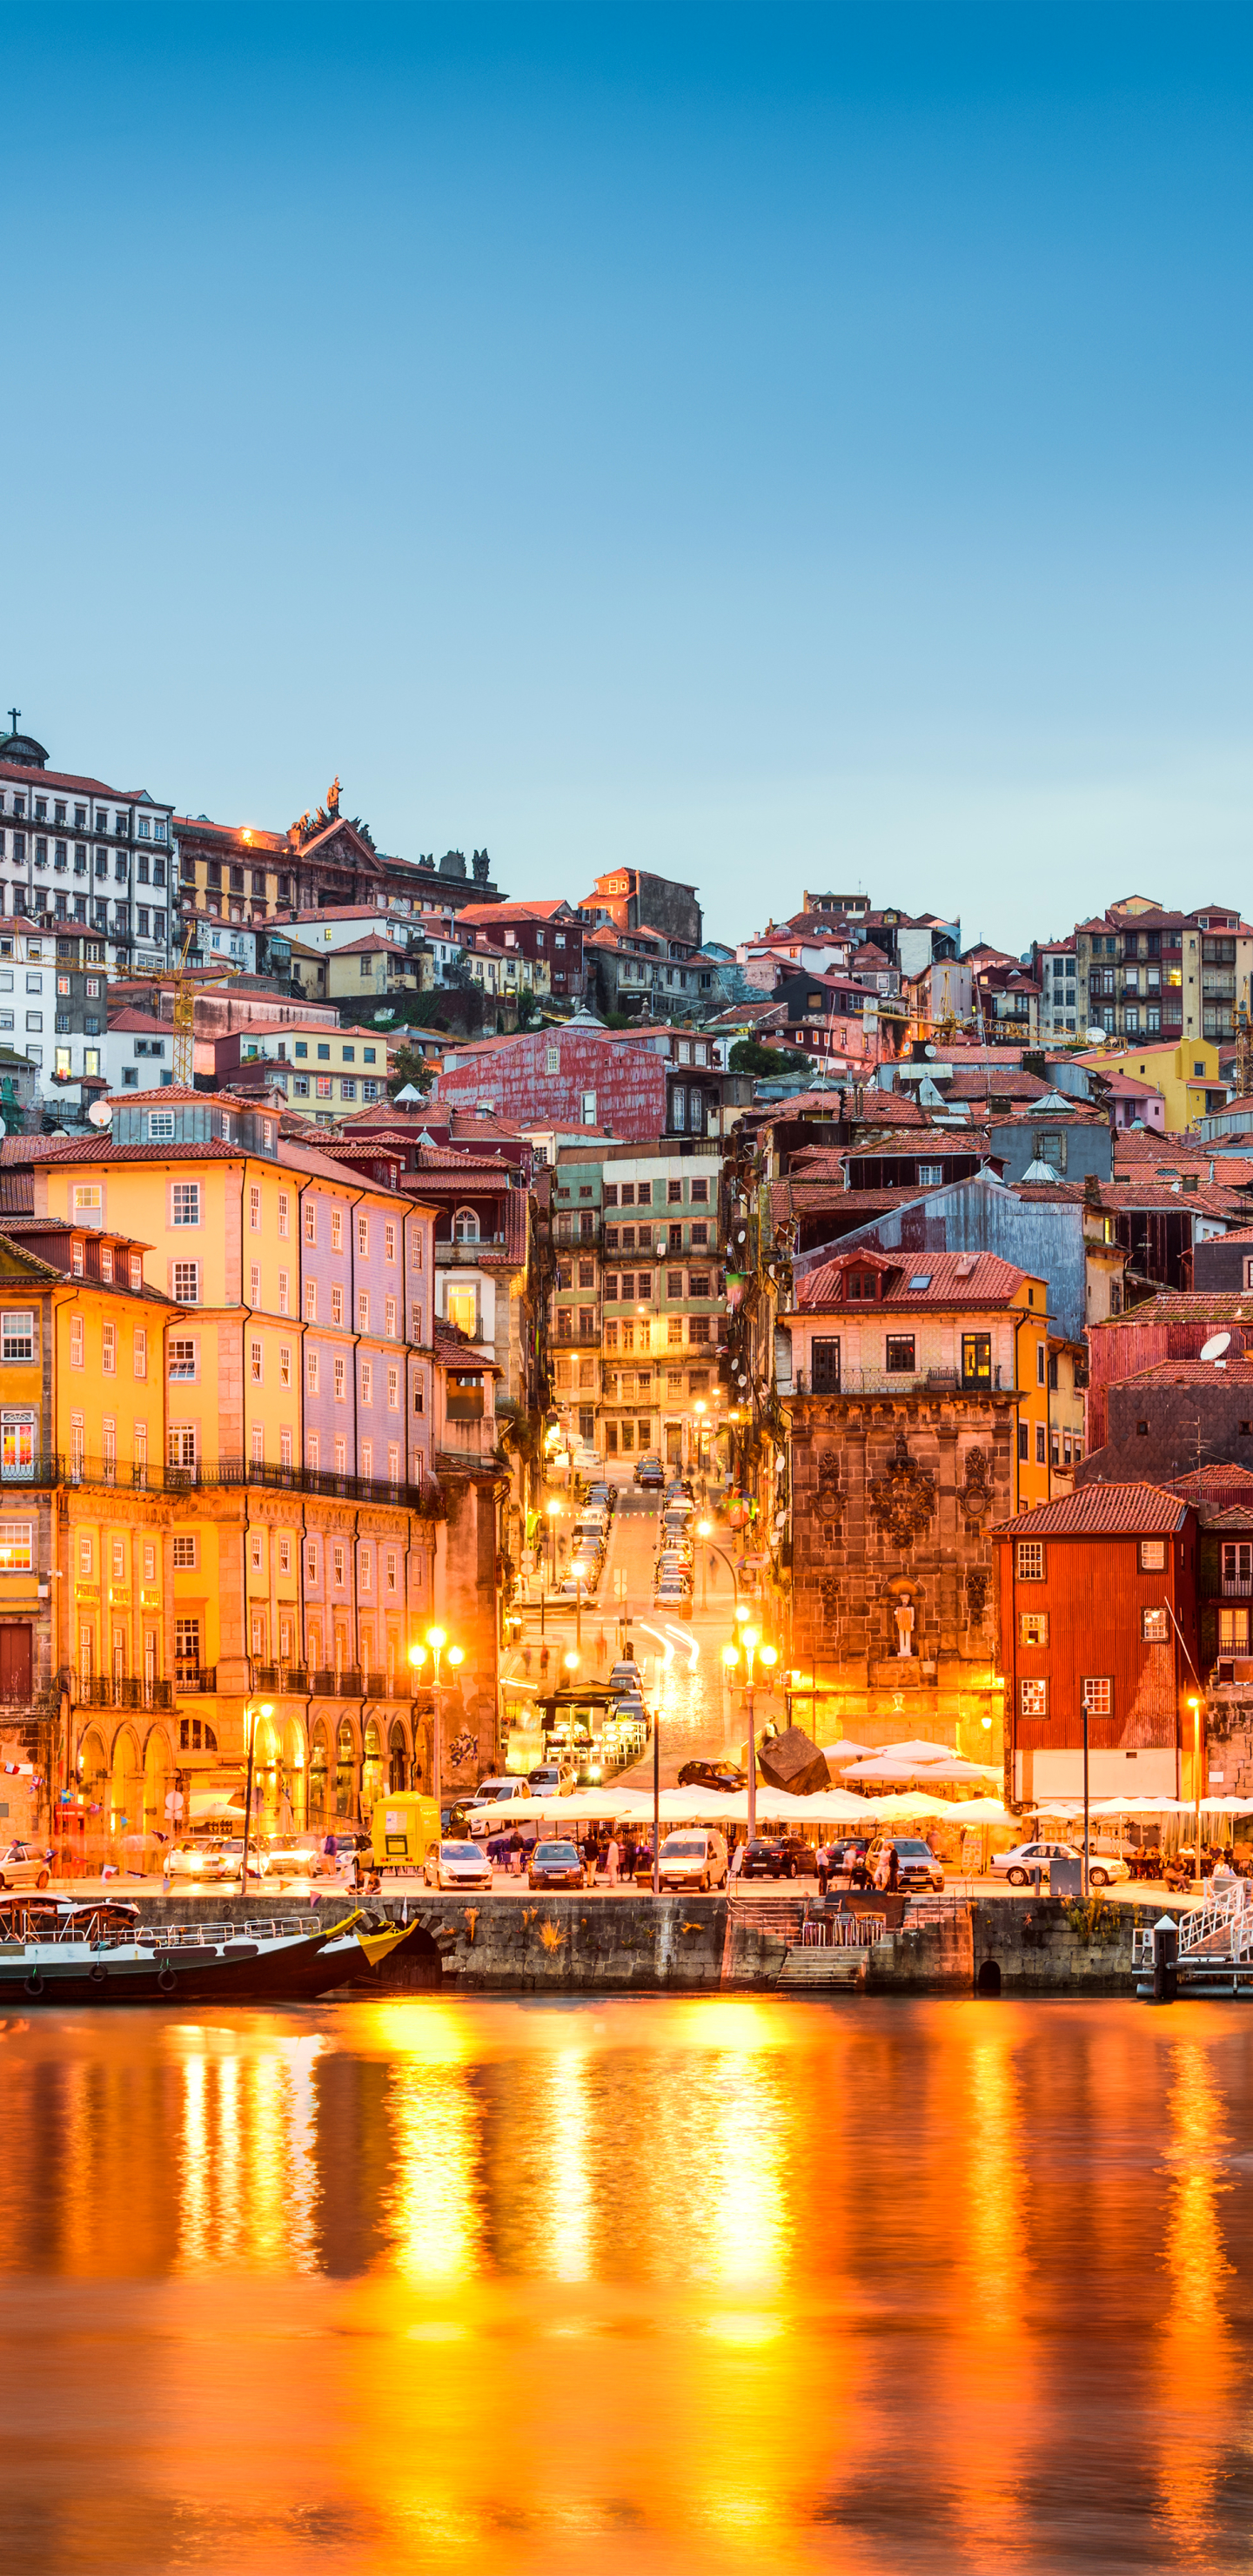 portugal, man made, porto, city, architecture, colorful, light, house, cities